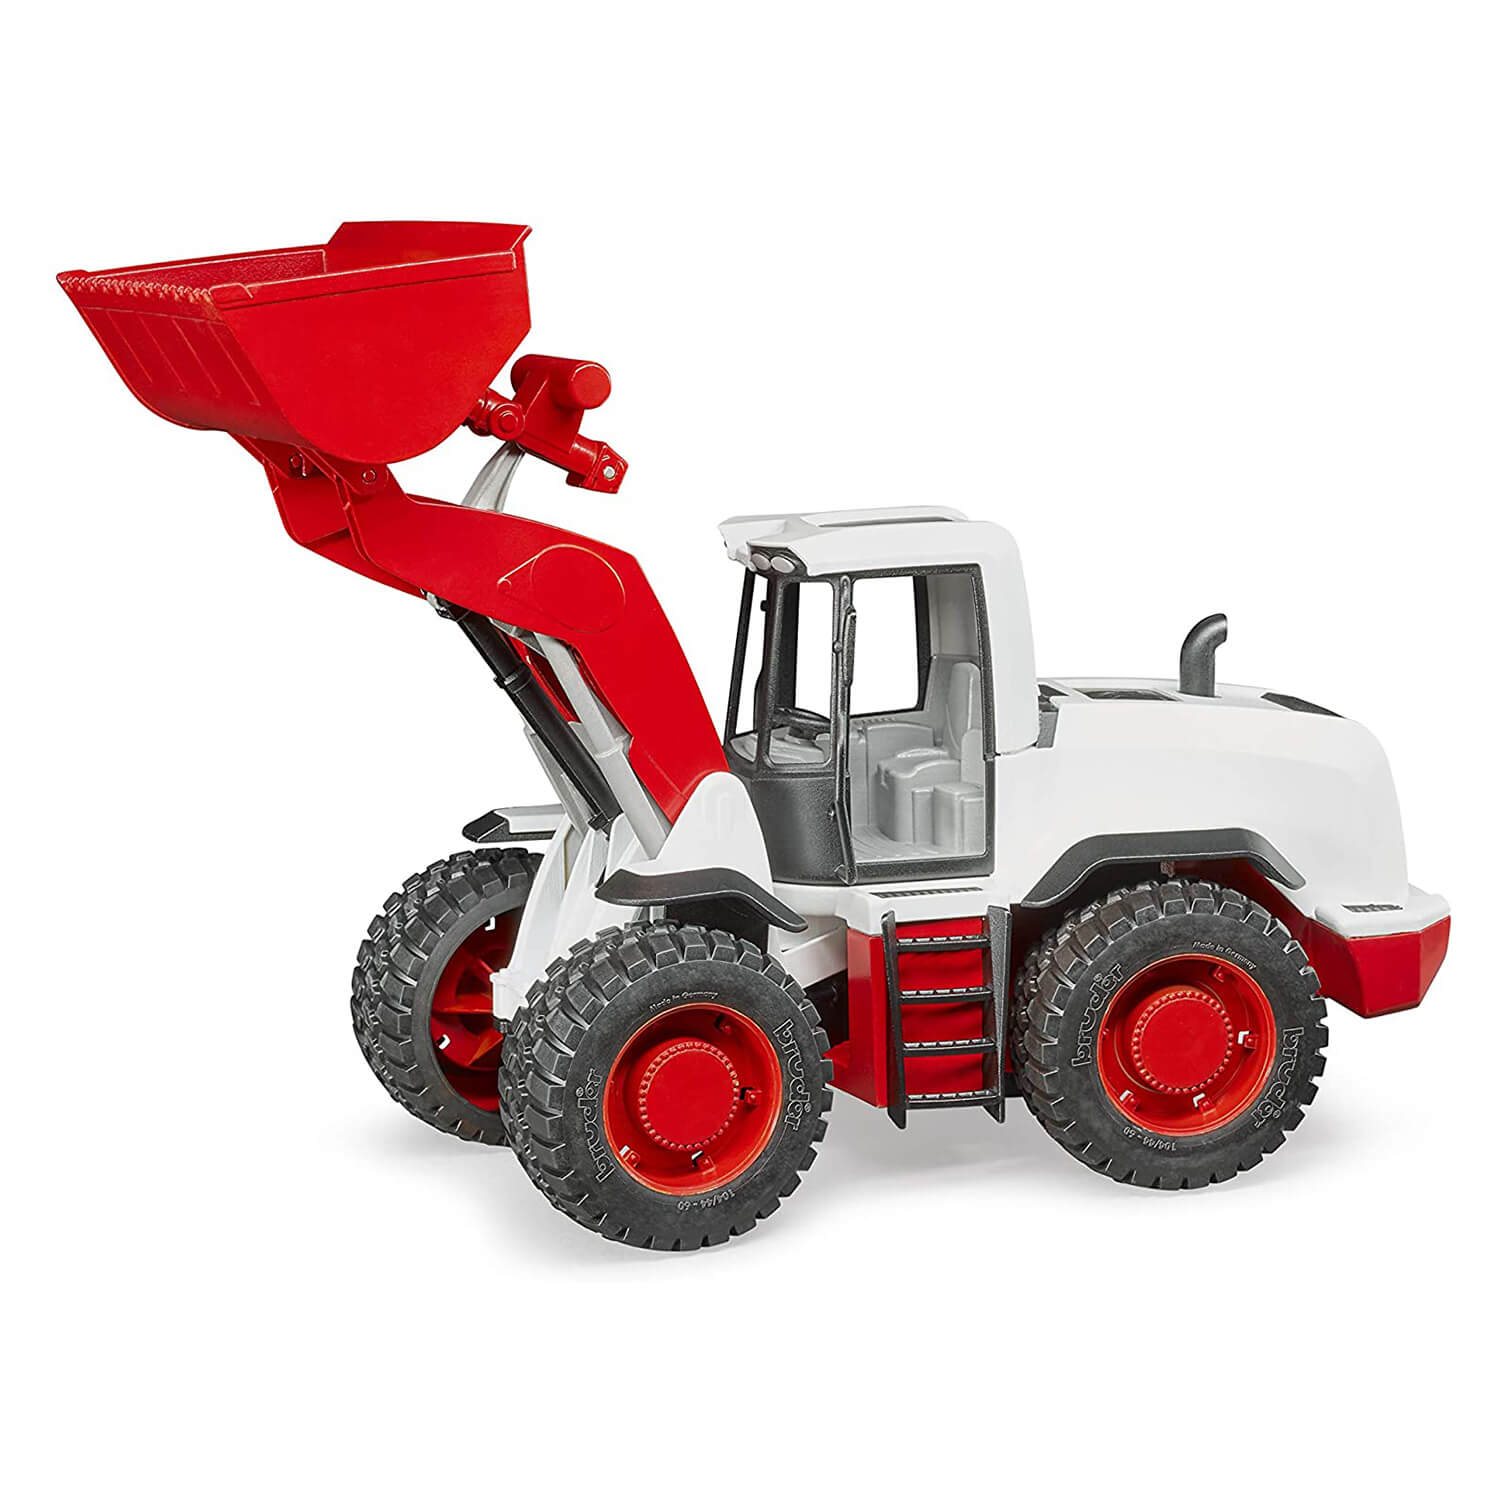 Side view of the loader toy.